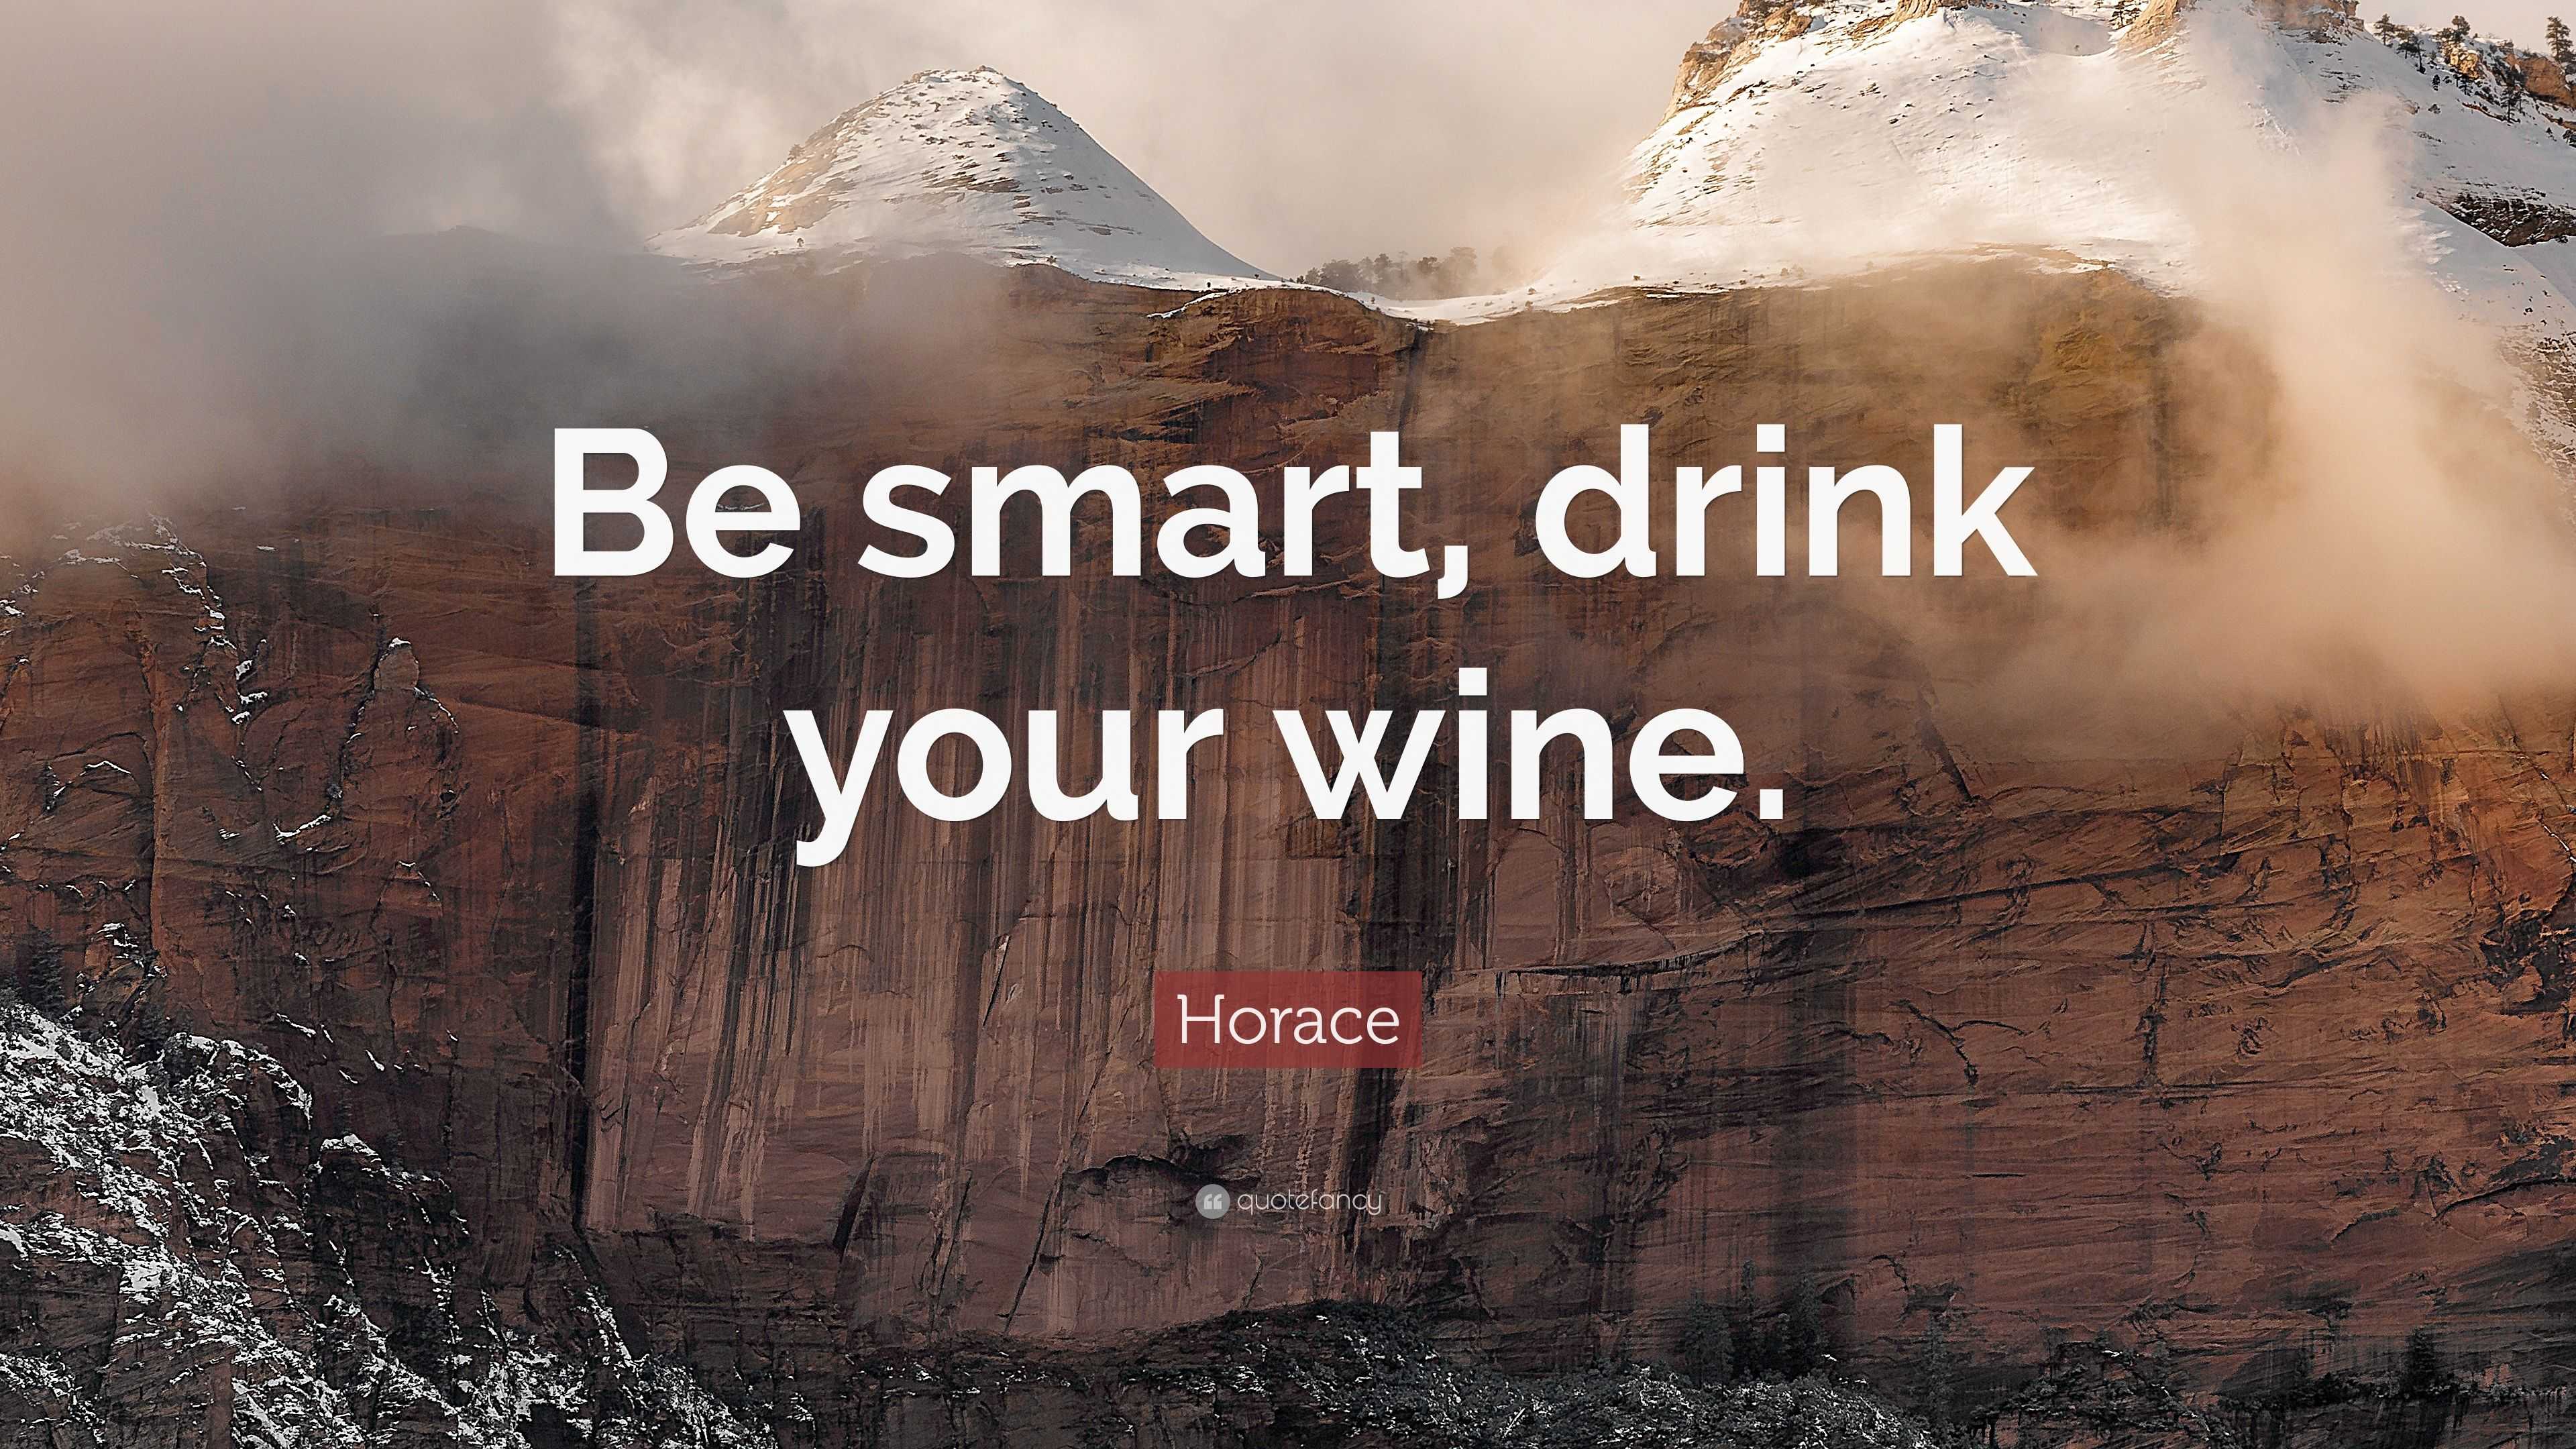 Horace Quote: “Be smart, drink your wine.”